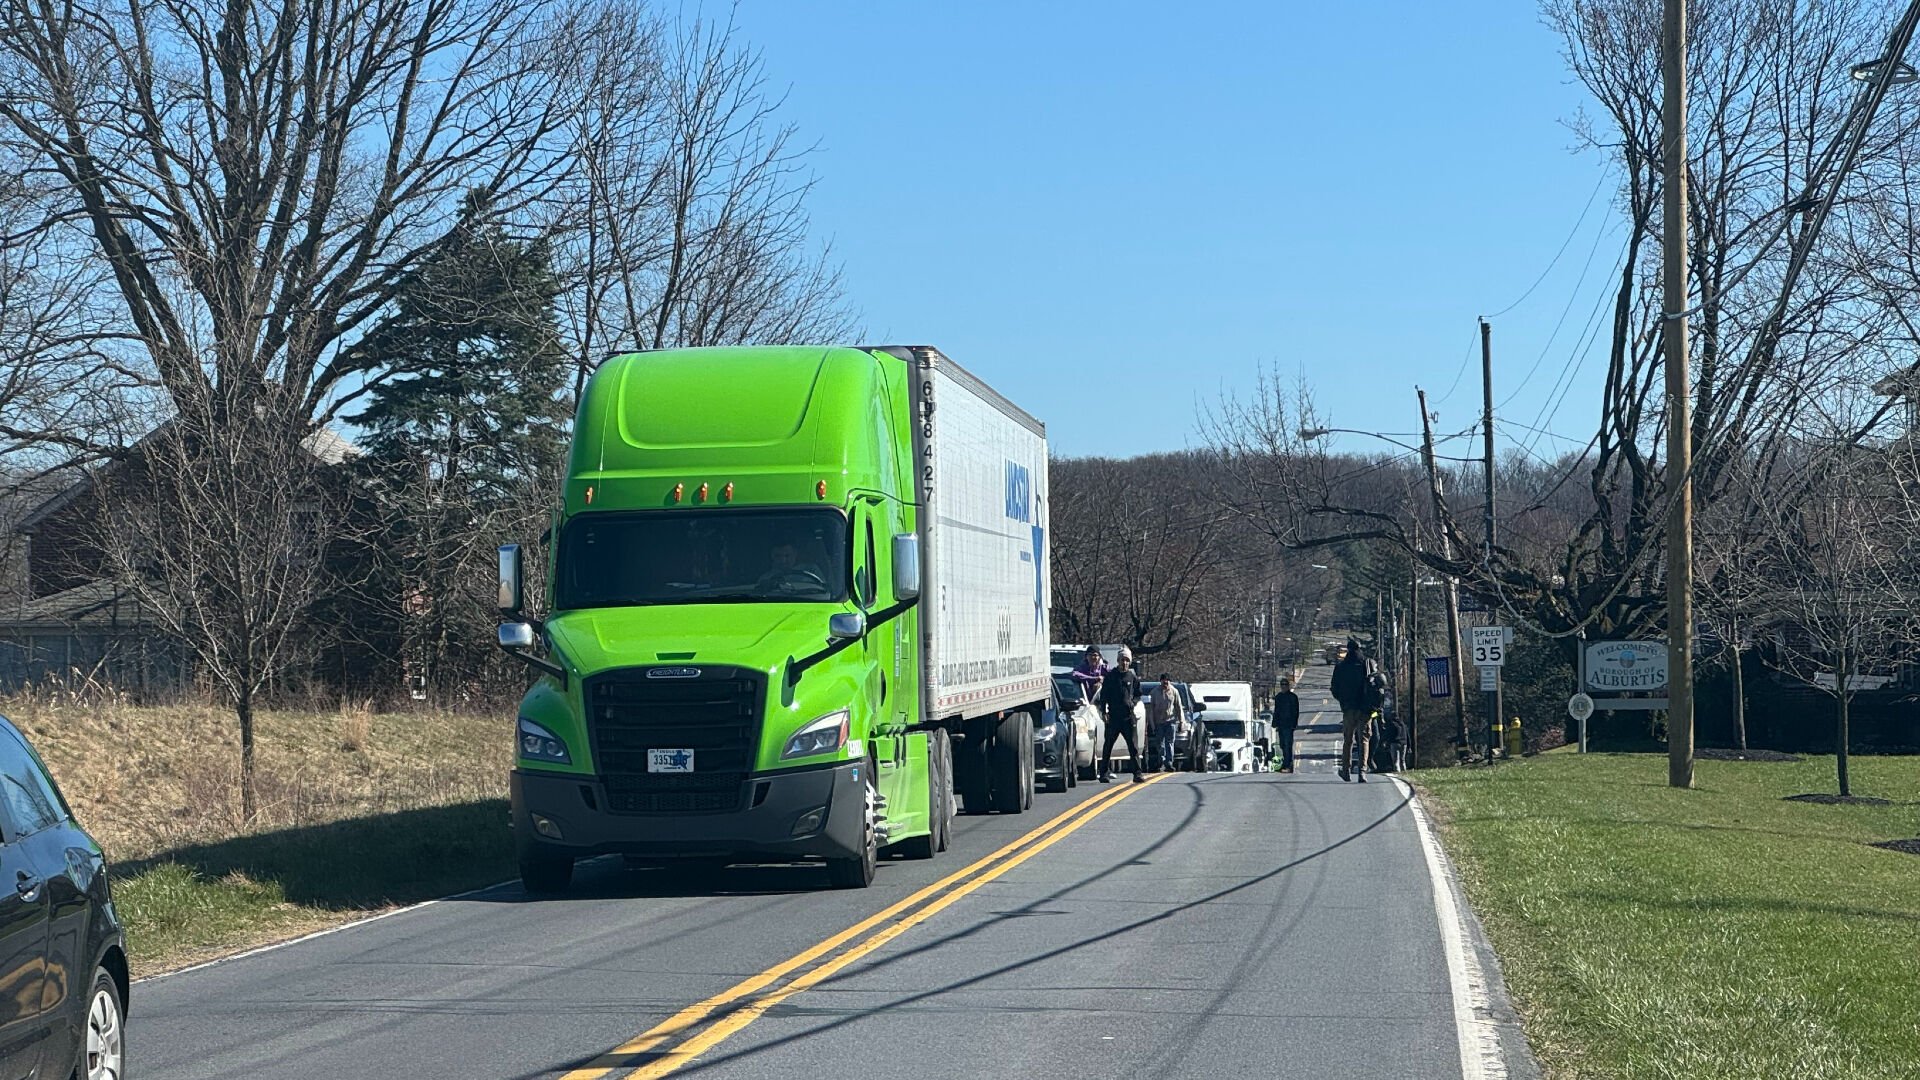 Suspicious package prompts evacuation and road closures in Lower Macungie; Allentown Bomb Squad called in for assistance | Lehigh Valley Regional News